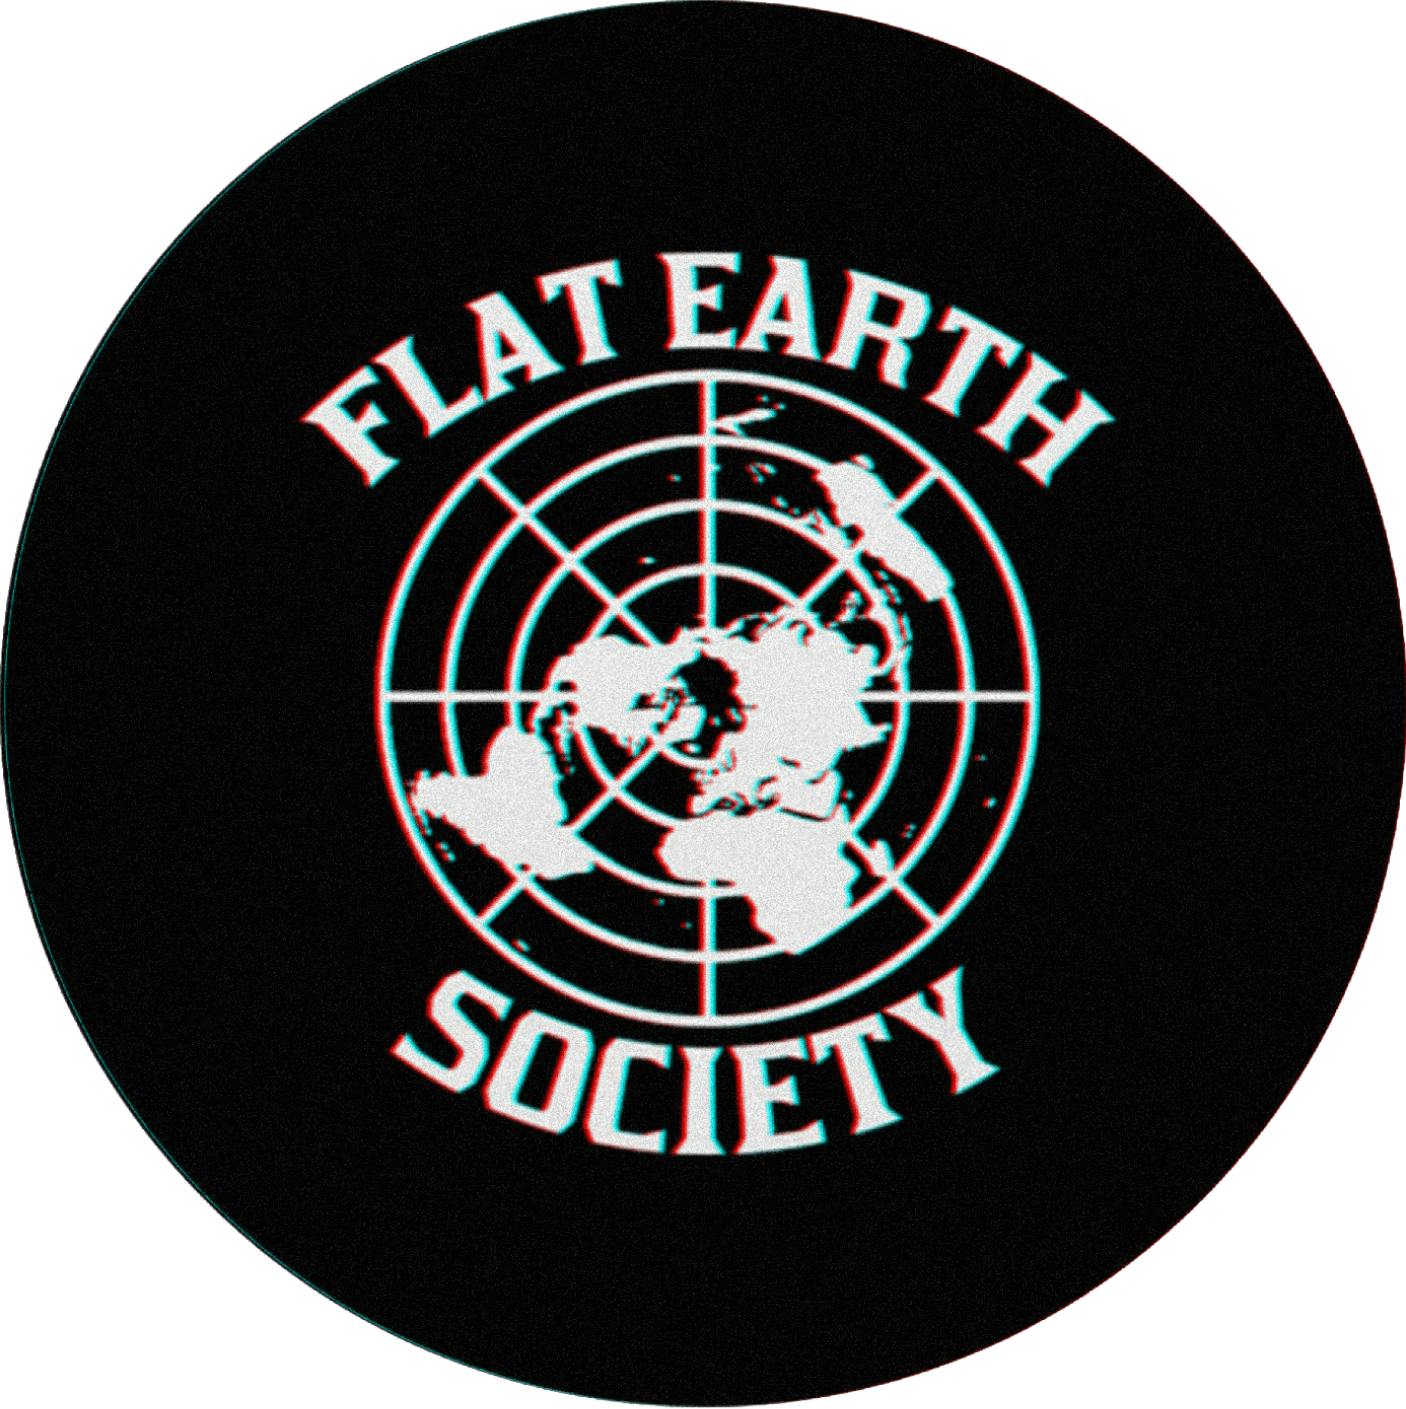 flat earth society logo using symbols associated with respected institutions